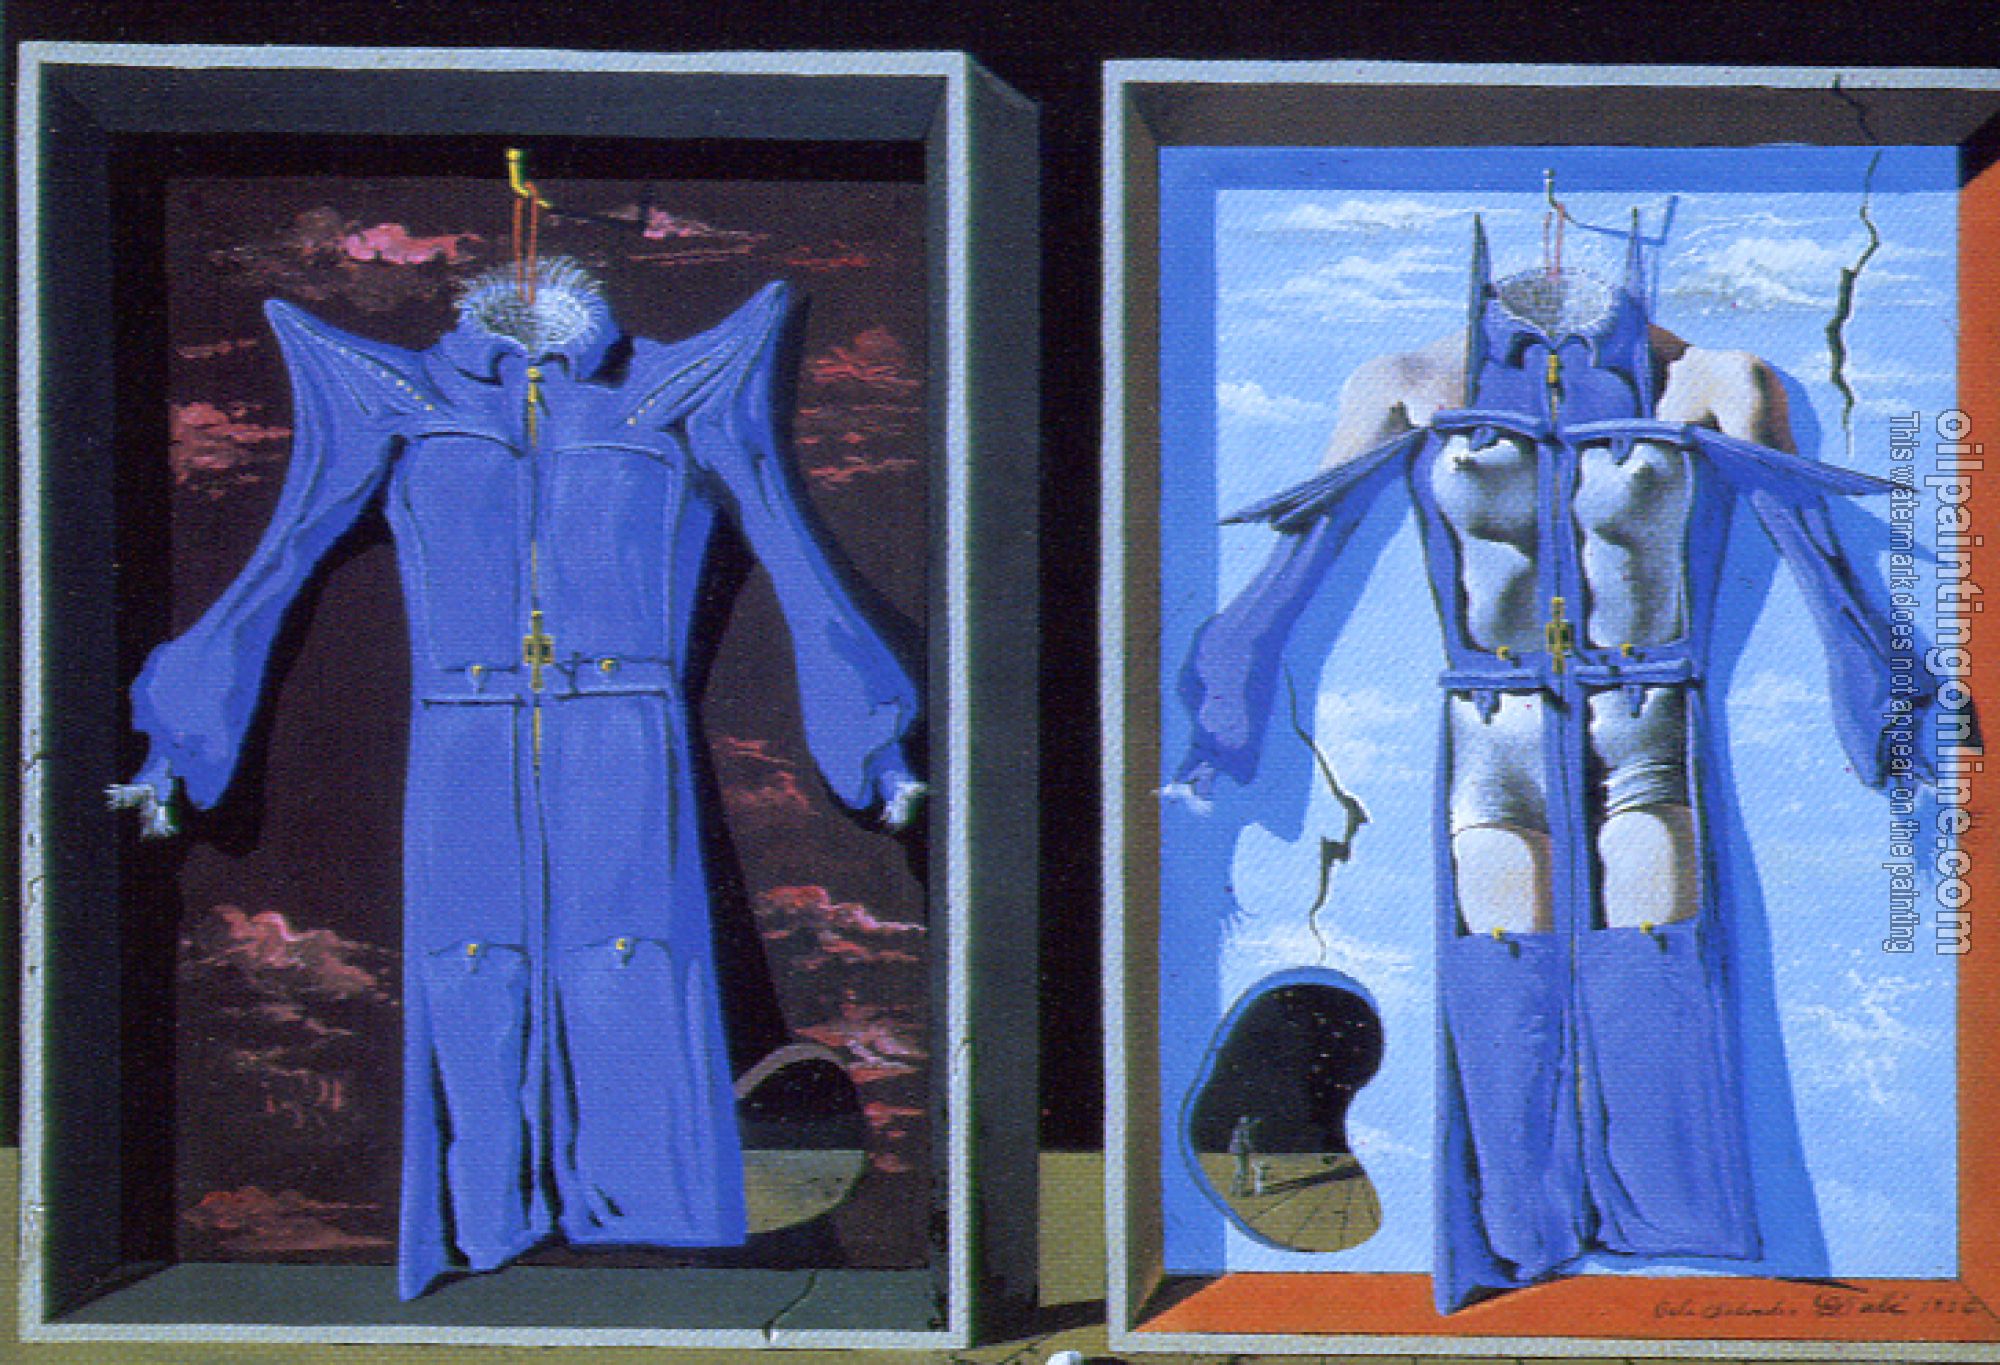 Dali, Salvador - Night and Day Clothes of the Body